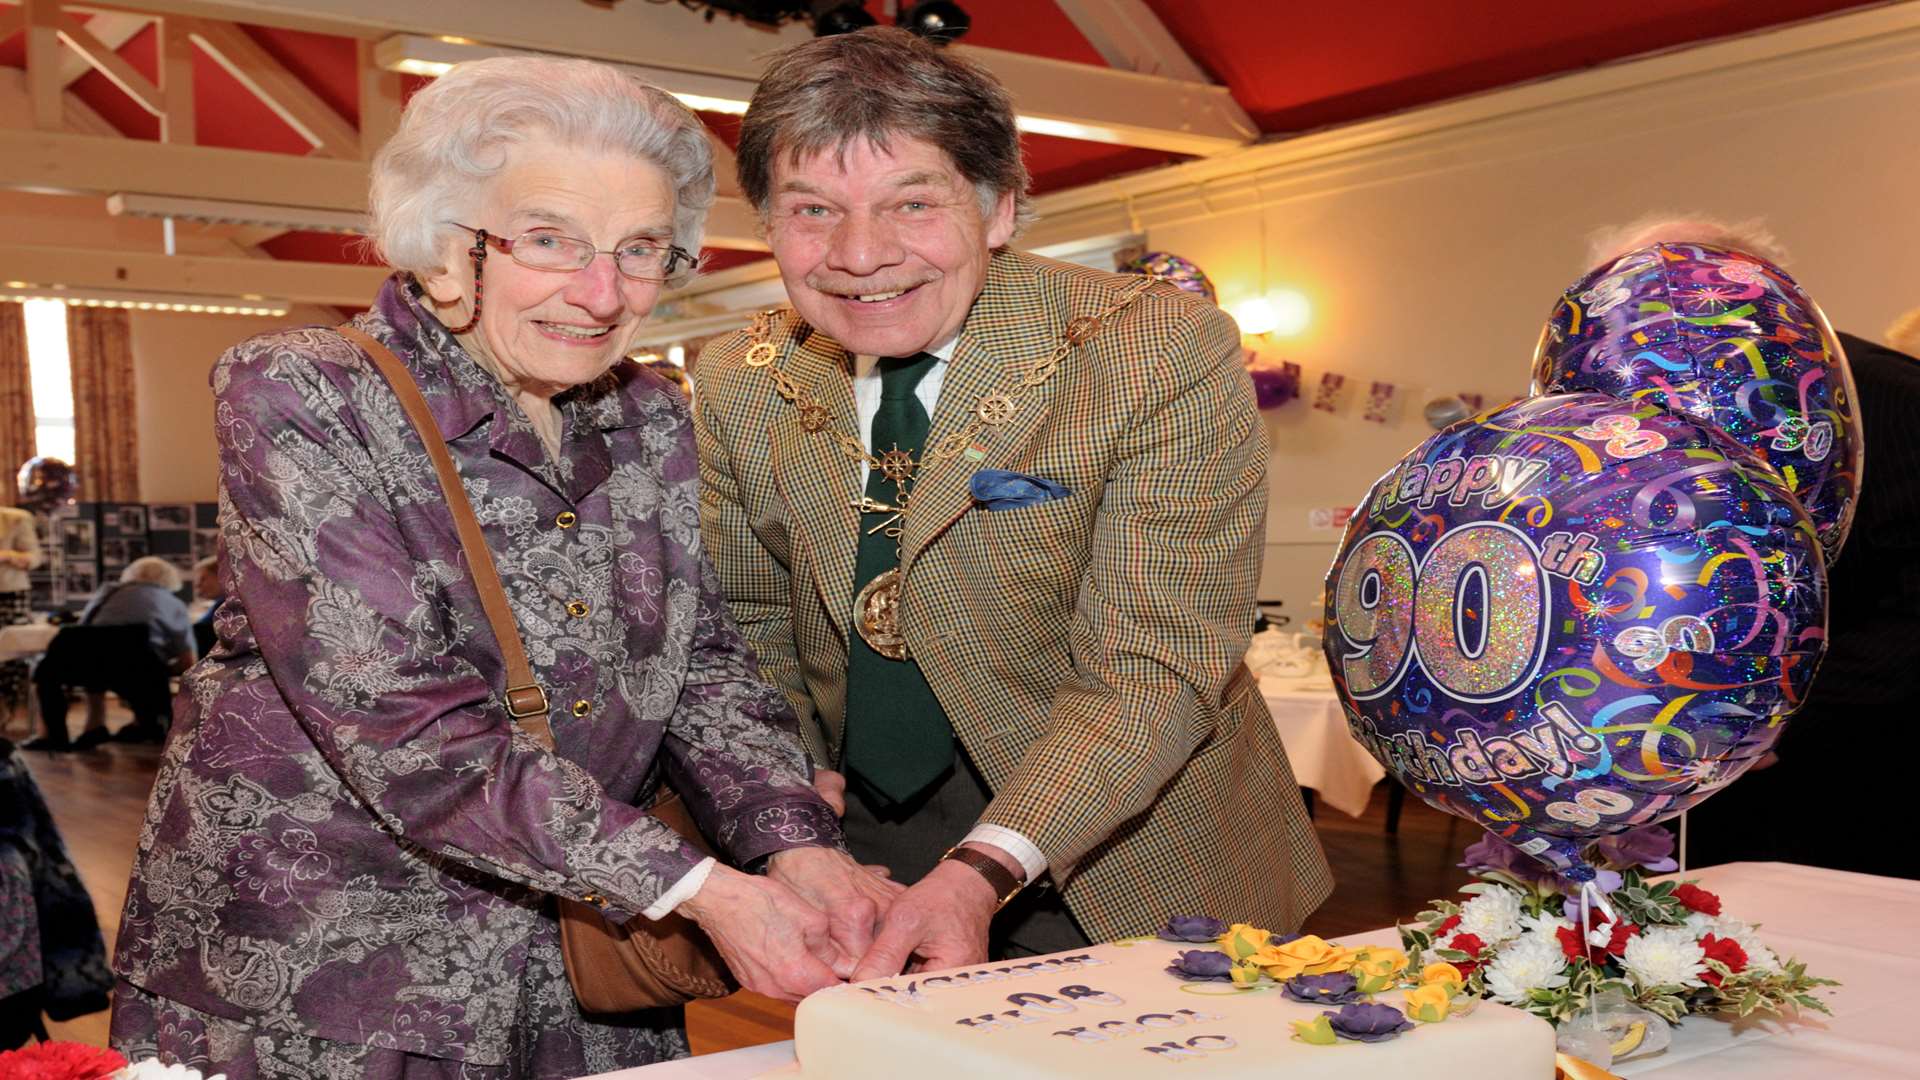 Doris Rutherford, 98, and Gravesham Mayor Michael Wenban, cut the cake for the Queen's 90th